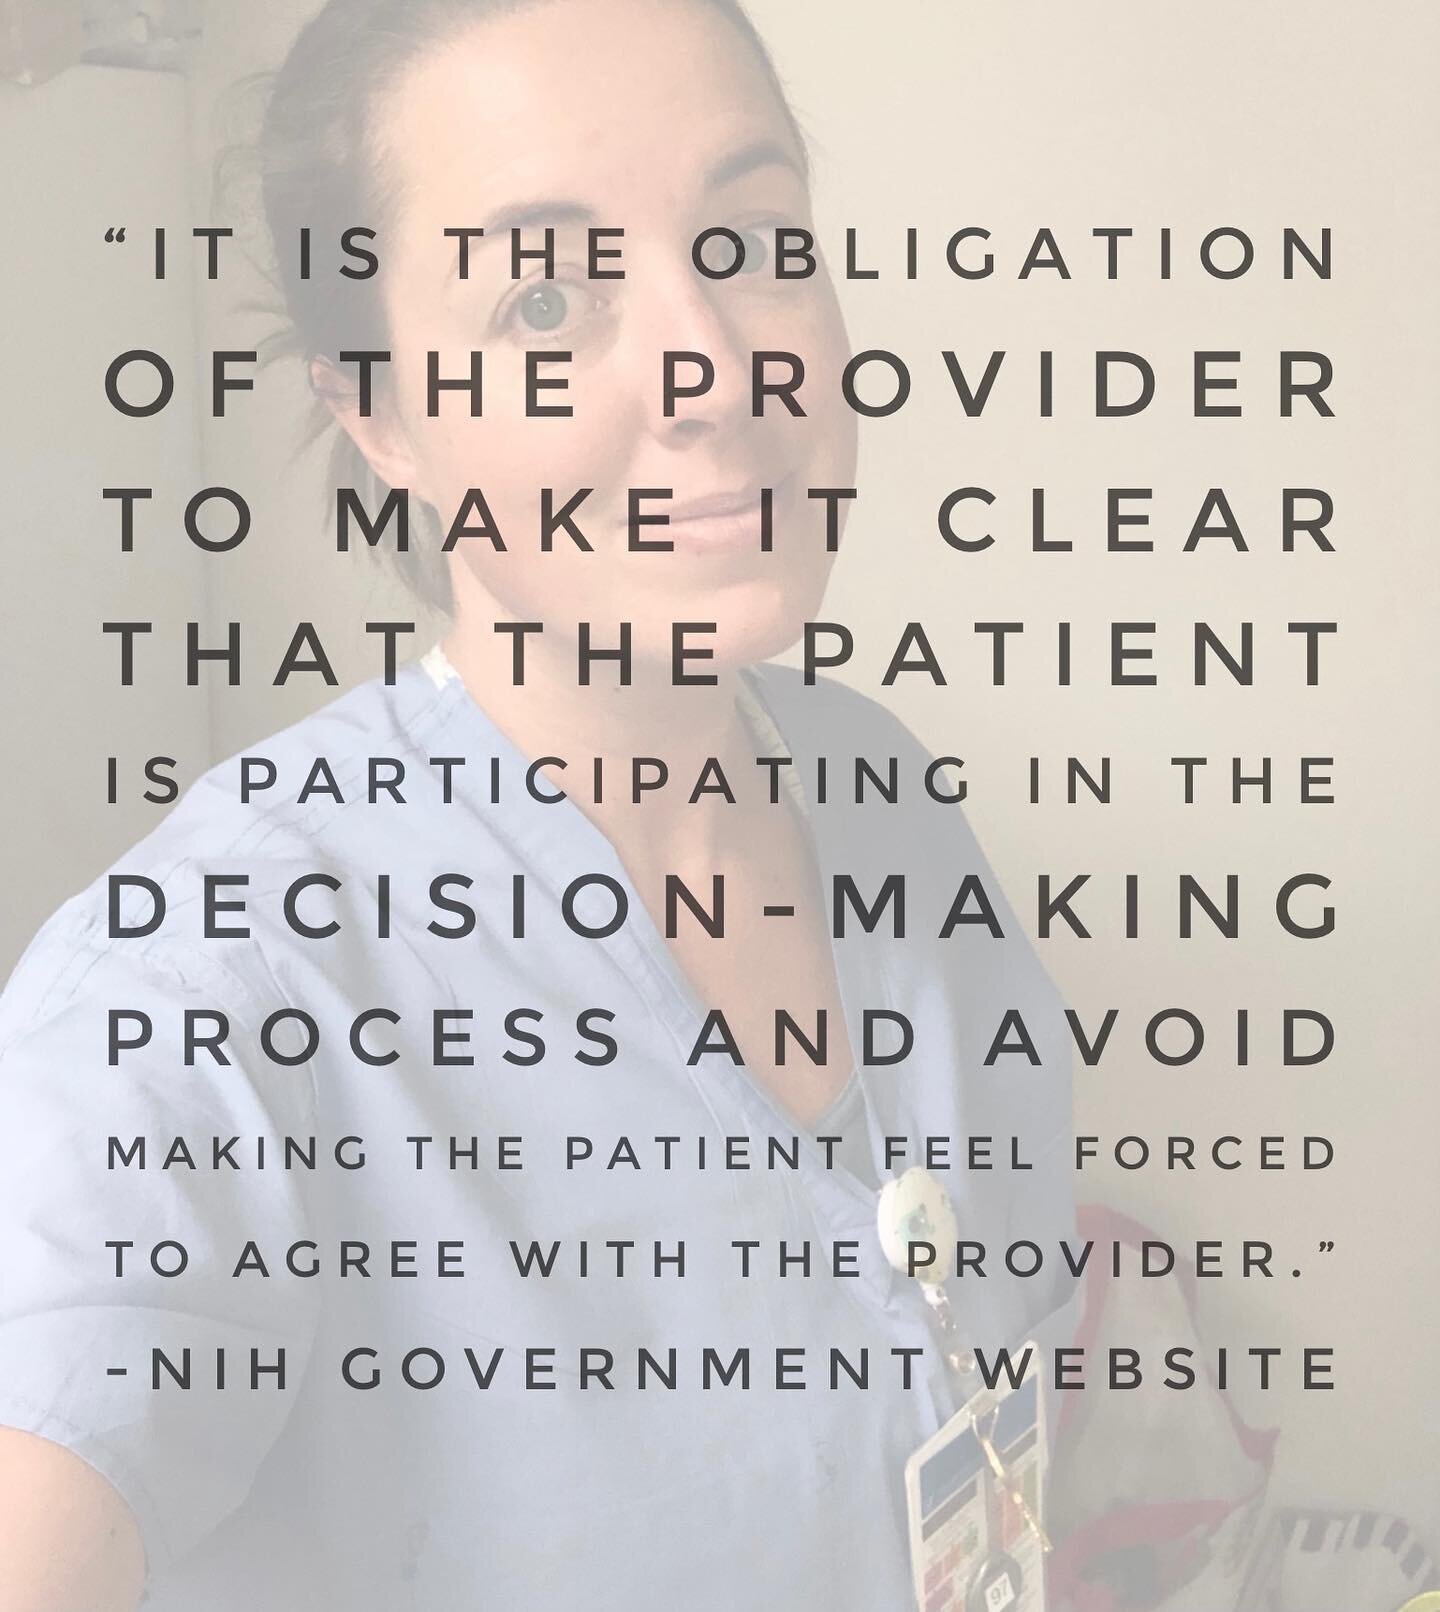 Tomorrow is week 5 on our journey into learning how to navigate a holistic hospital birth. The law of informed consent is the foundation on which we build our birth mission statement. I have often seen that hospital staff forgets the question mark at